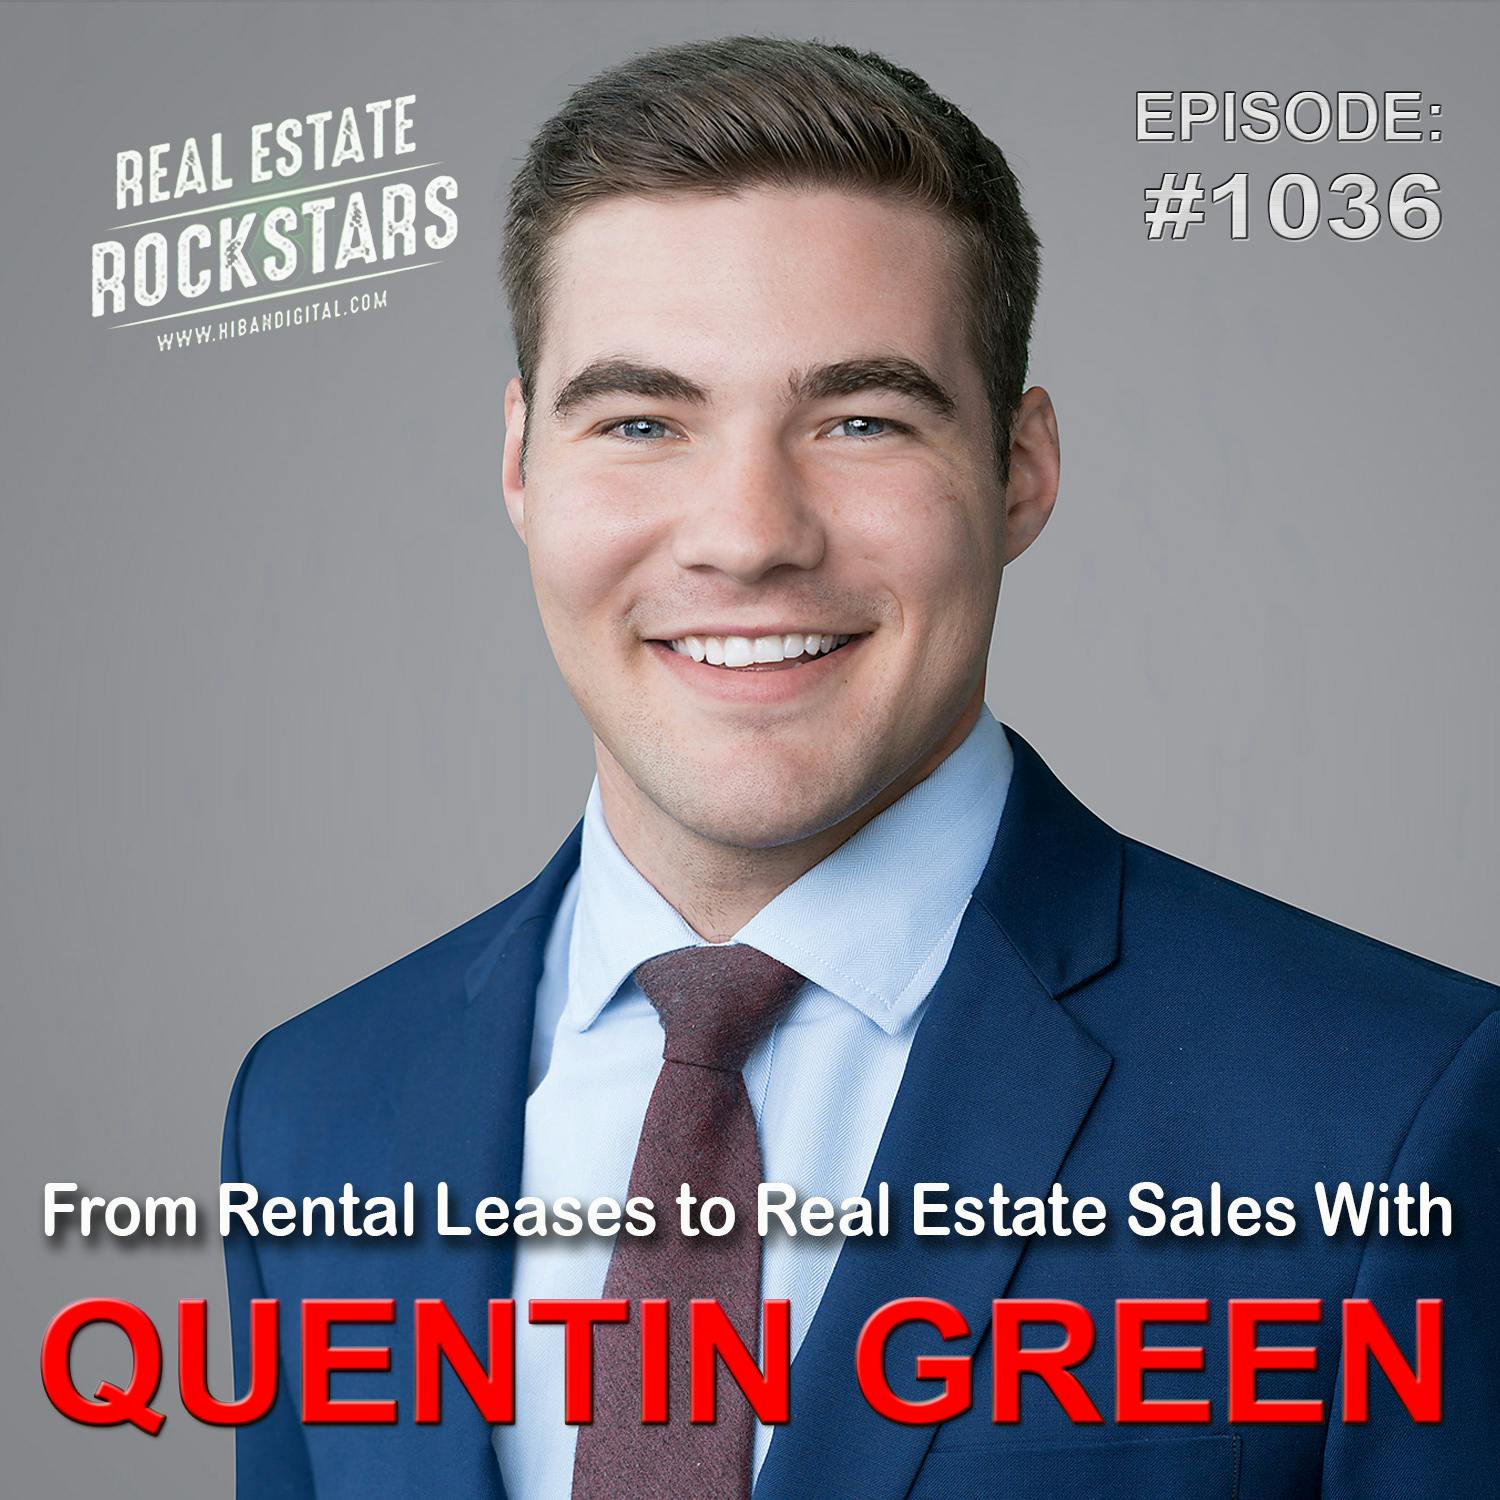 1036: From Rental Leases to Real Estate Sales With Quentin Green